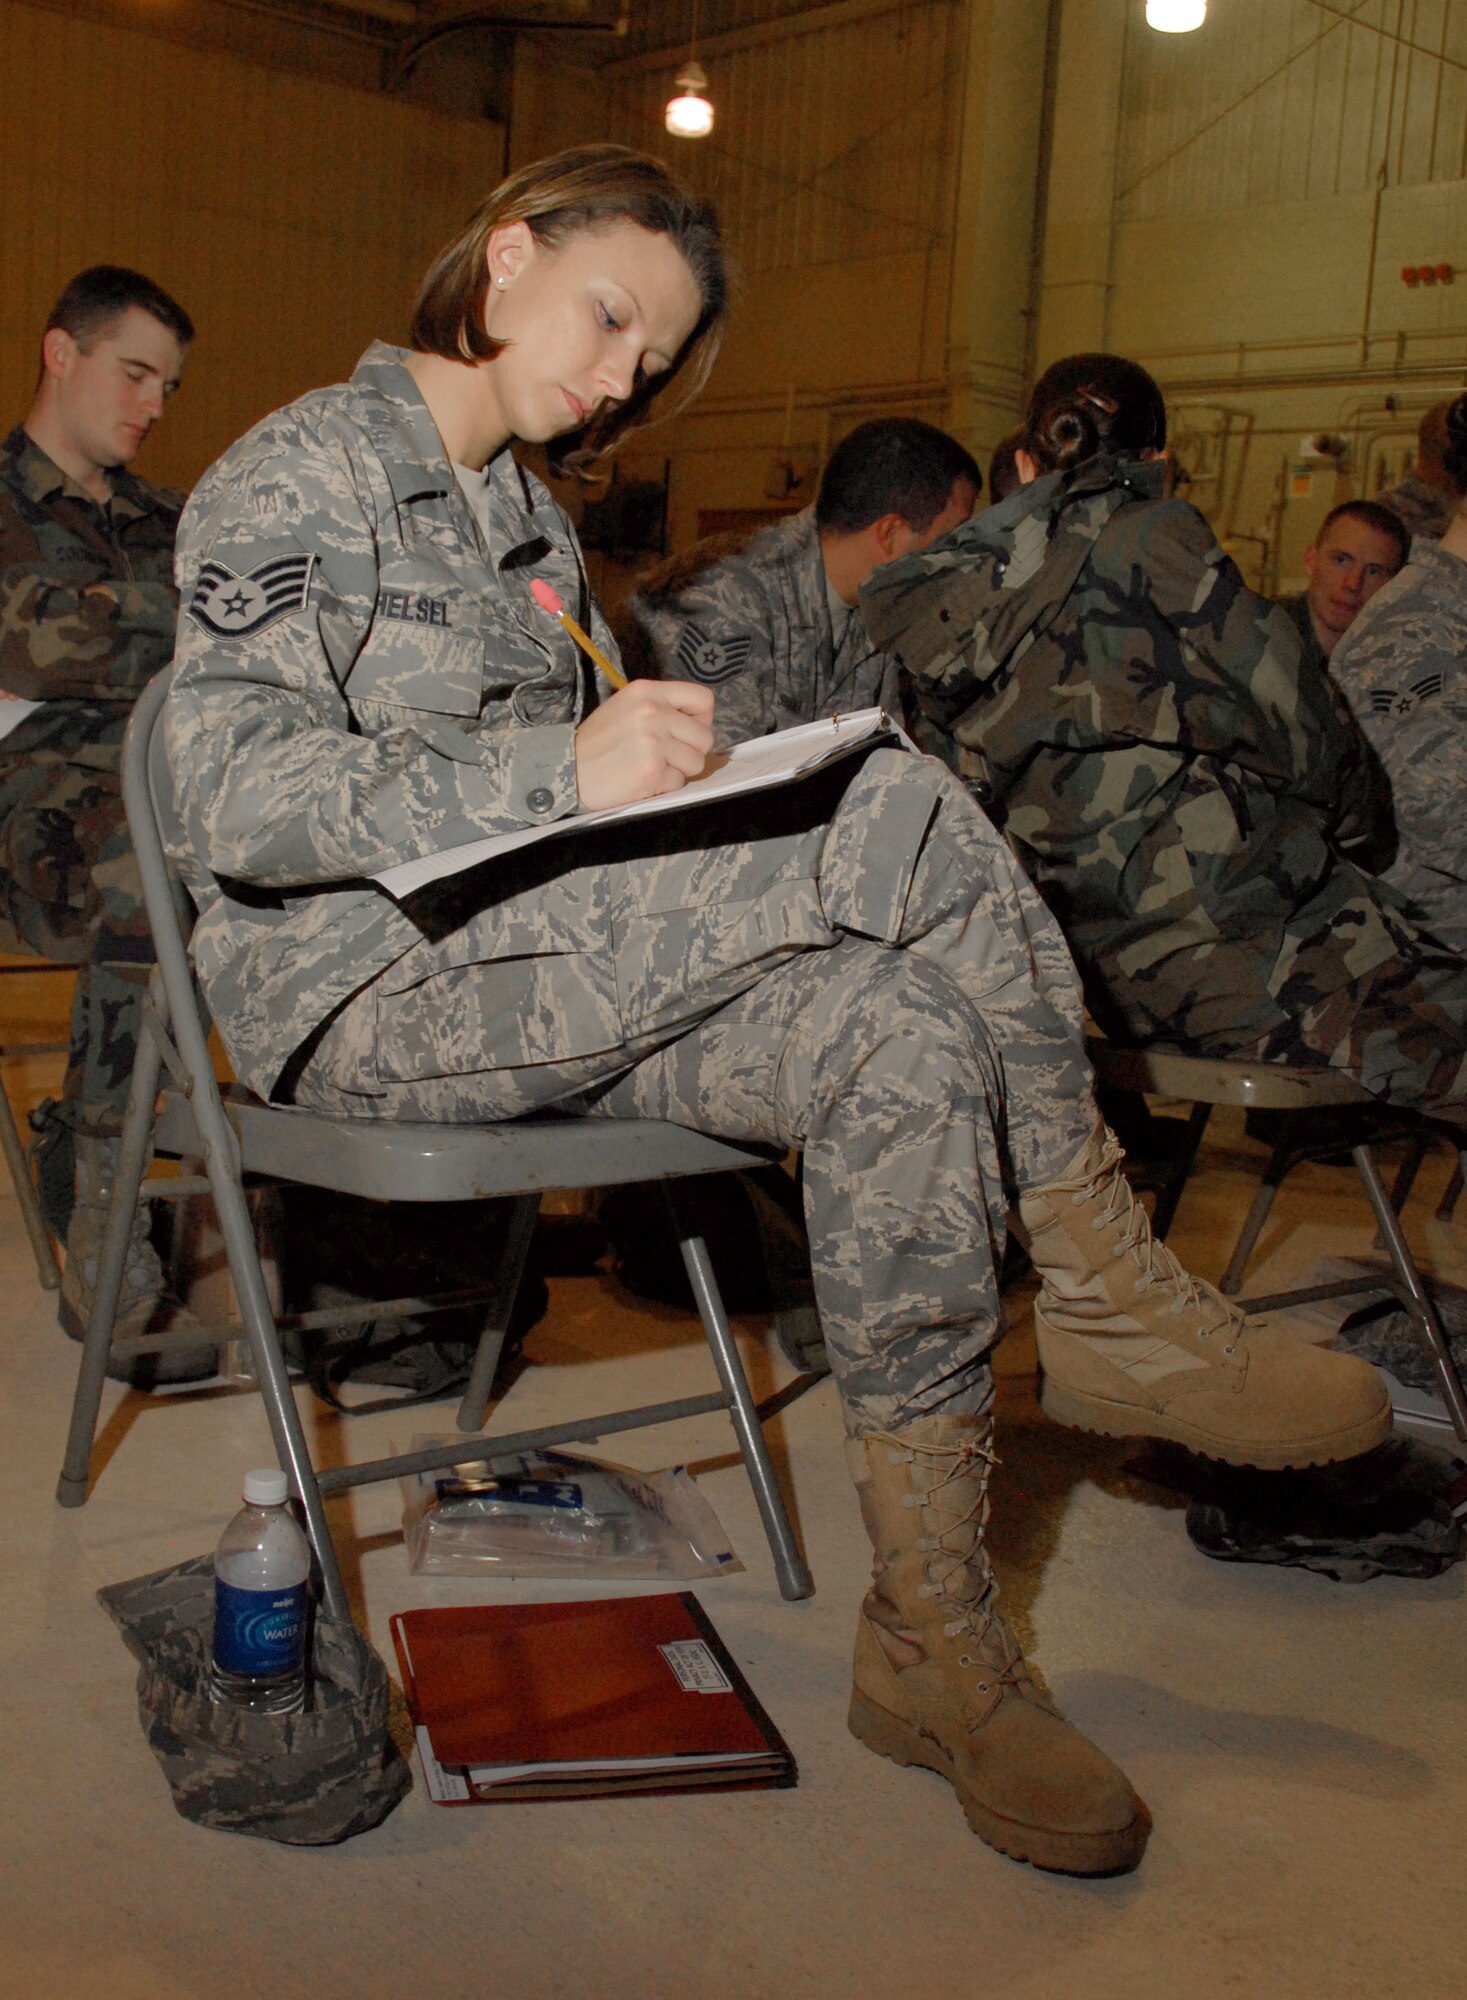 Staff. Sgt. Amber Helsel reviews paperwork in the briefing room at the 110th Fighter Wing, Battle Creek, Mi., Nov. 7, 2009. Helsel was participating in a mobility training exercise at the base. (U.S. Air Force photo by Tech. Sgt. David Eichaker/released)